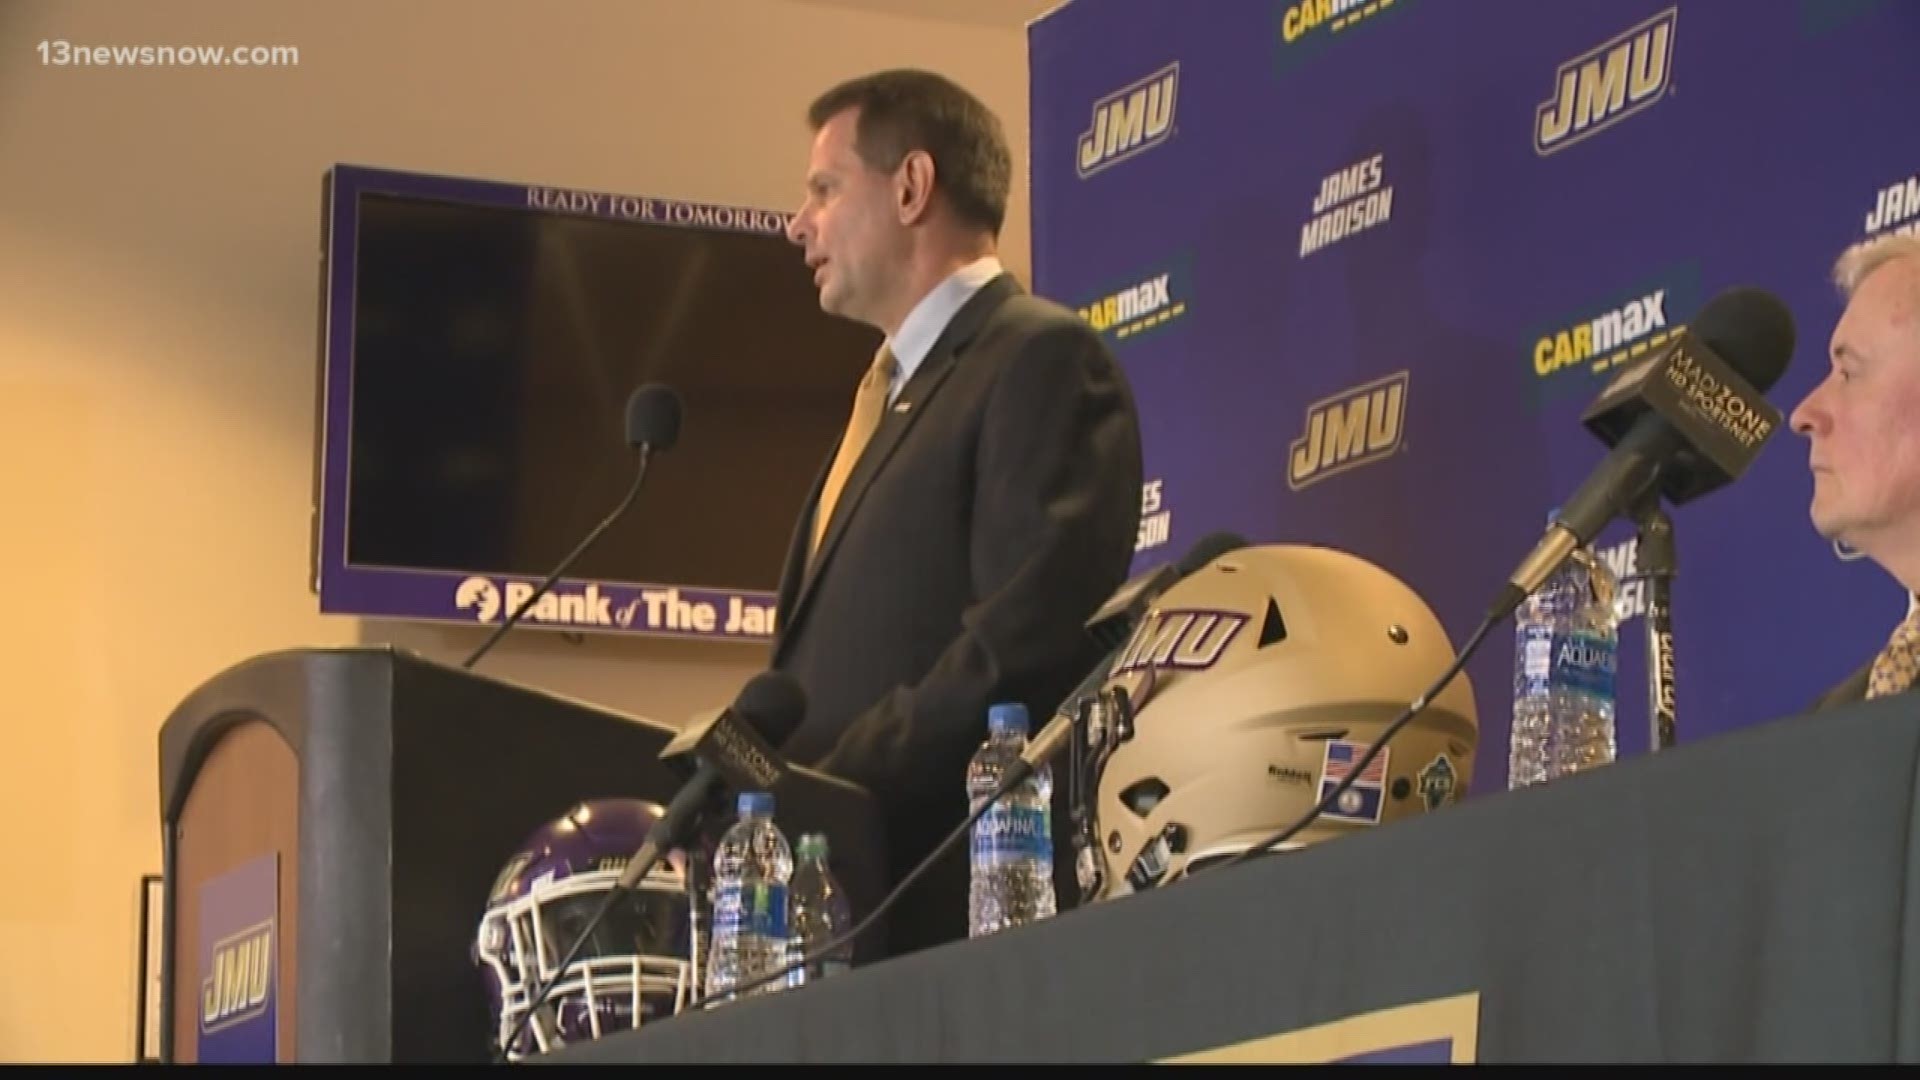 Curt Cignetti taking over officially as the new head football coach at James Madison on Monday. He comes over from Elon after two seasons. While there, he led the Phoenix as the first CAA school to upset the Dukes and snap their 22 game conference win str